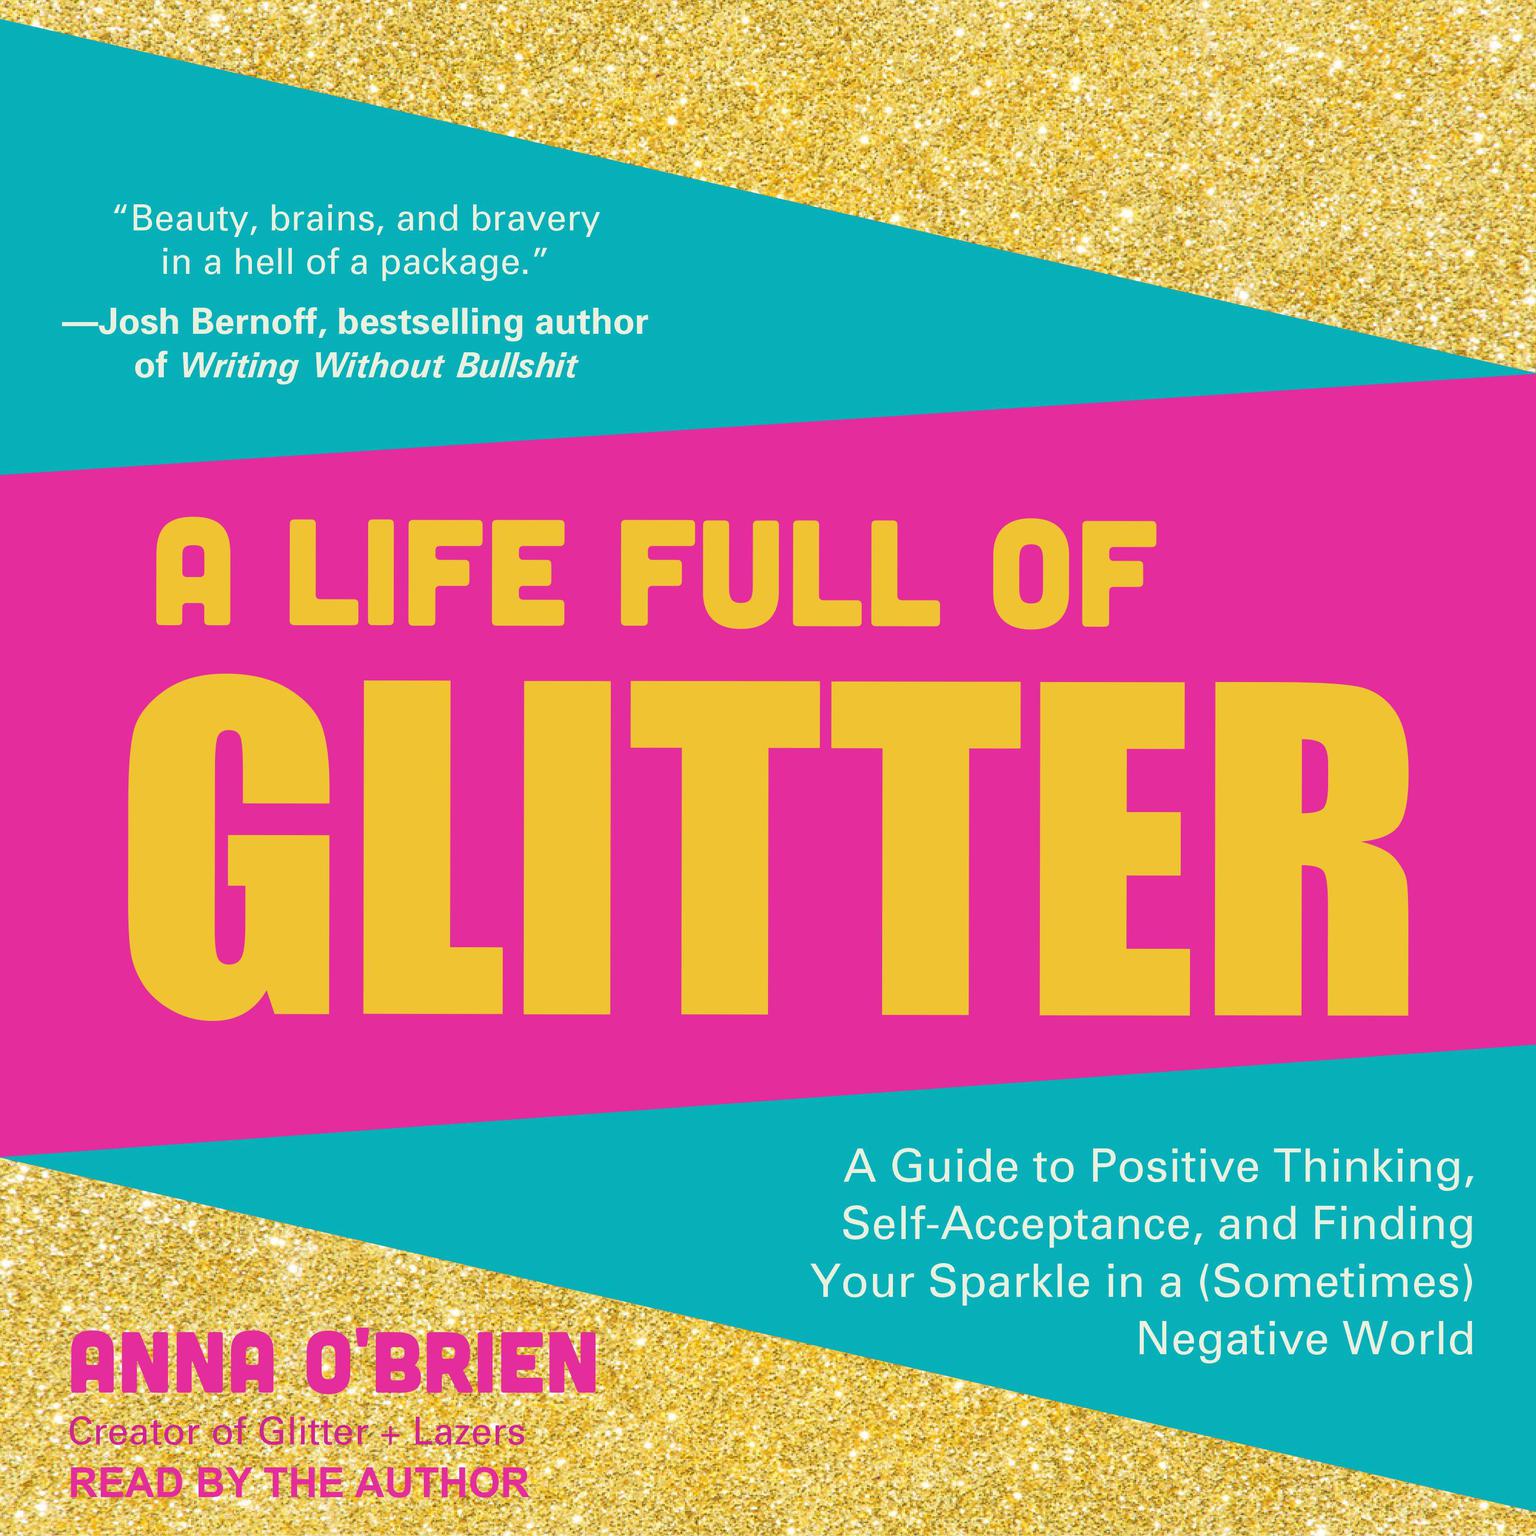 A Life Full of Glitter: A Guide to Positive Thinking, Self-Acceptance, and Finding Your Sparkle in a (Sometimes) Negative World Audiobook, by Anna O'Brien